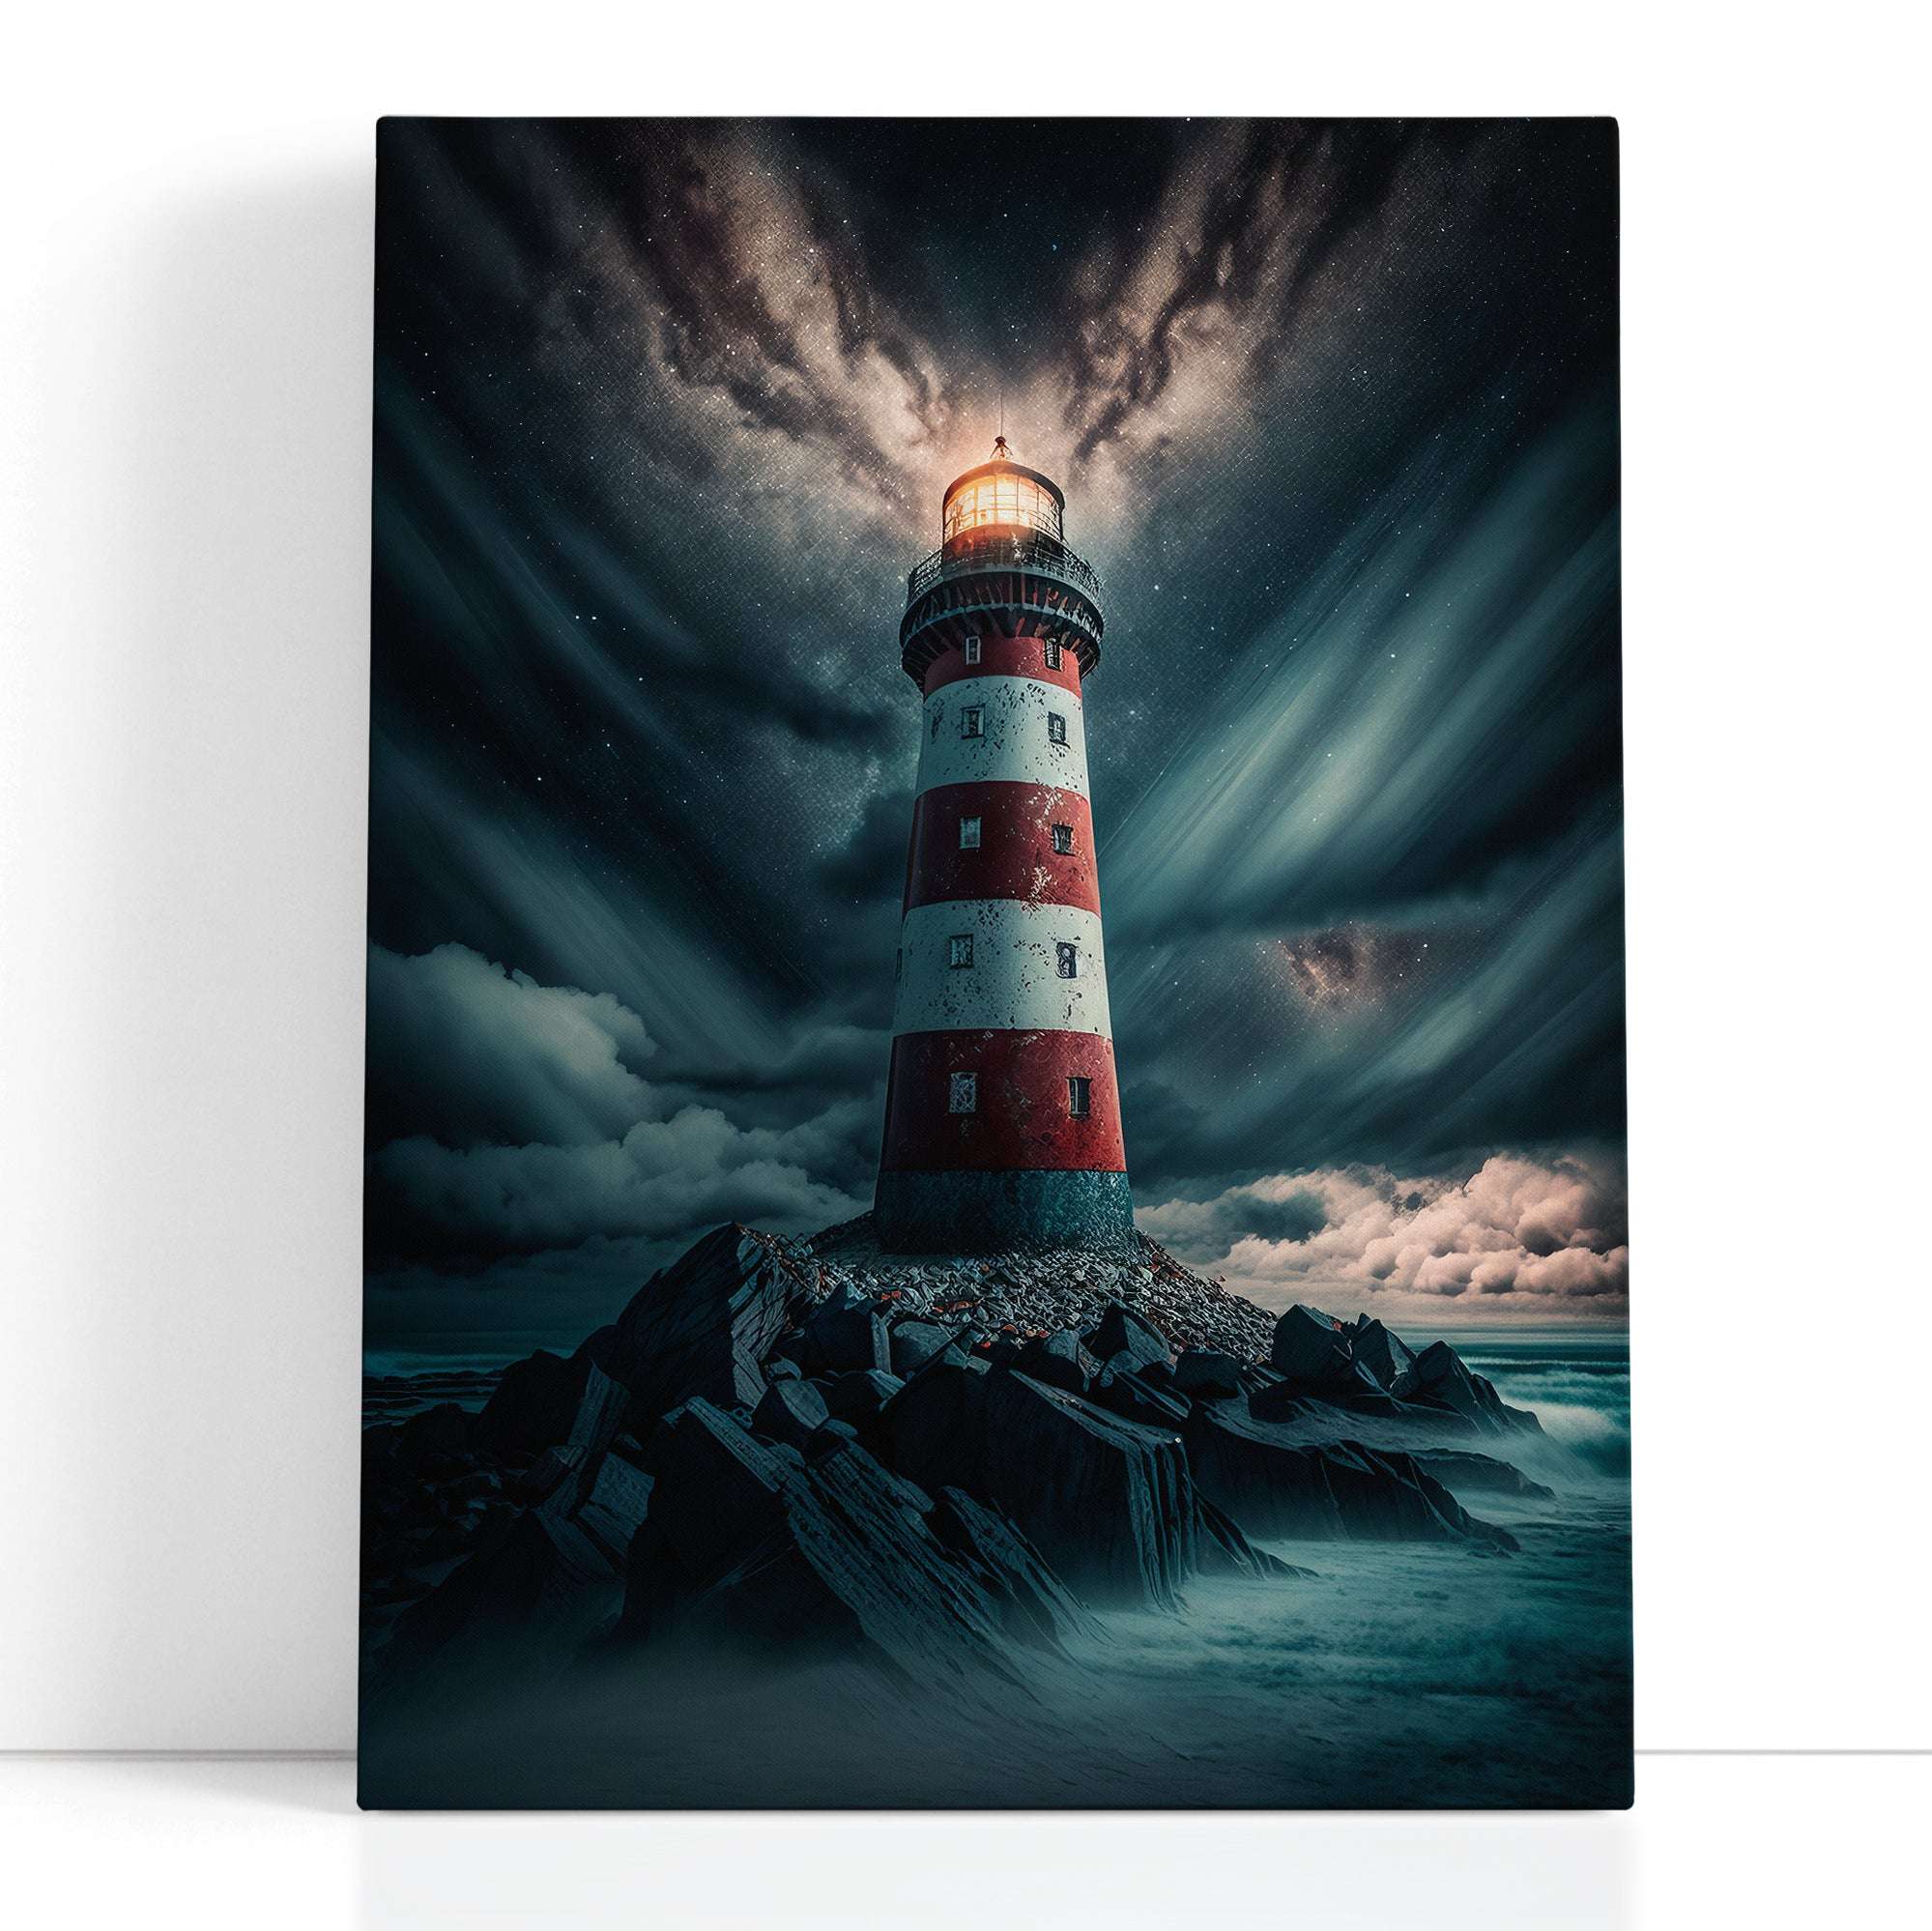 Red and White Lighthouse Embraced by Clouds - Canvas Print - Artoholica Ready to Hang Canvas Print